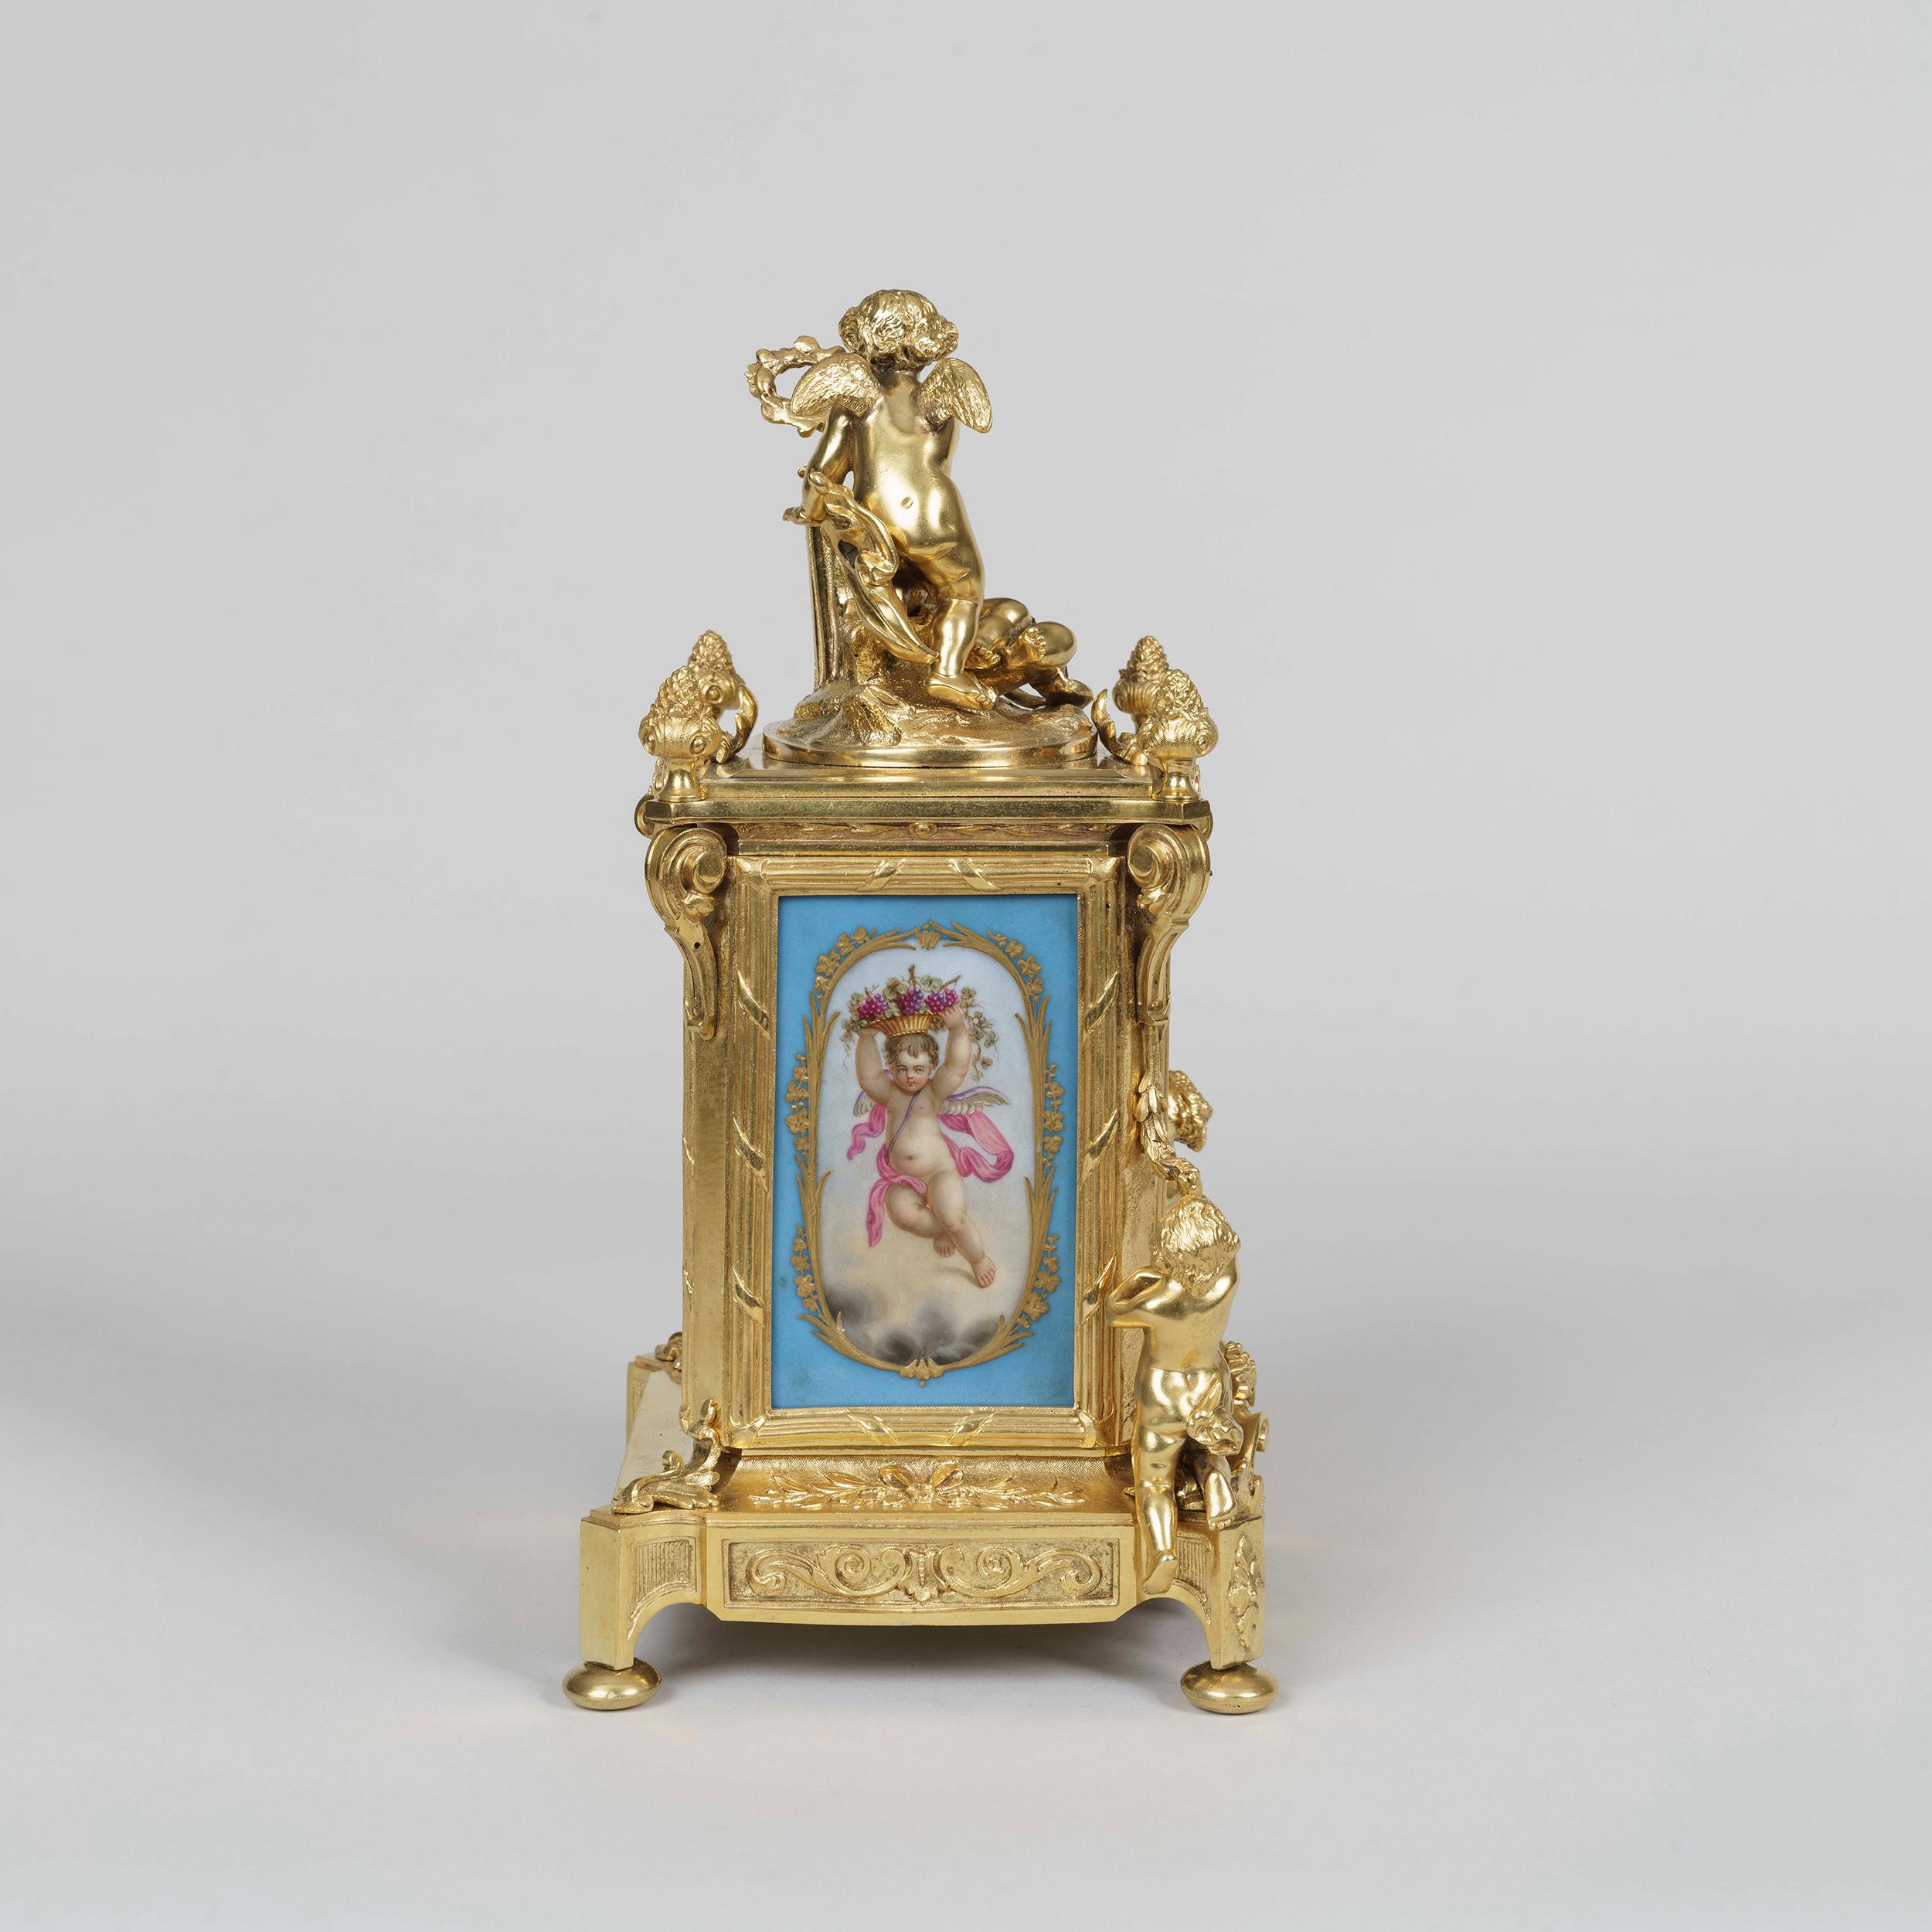 A clock garniture in the Louis XVI Manner
By Le Roy et Fils

The ormolu clock case and accompanying candelabra dressed with blue 'Sevres' style hand decorated polychrome panels to the face and sides, depicting amorini, flowers, and musical